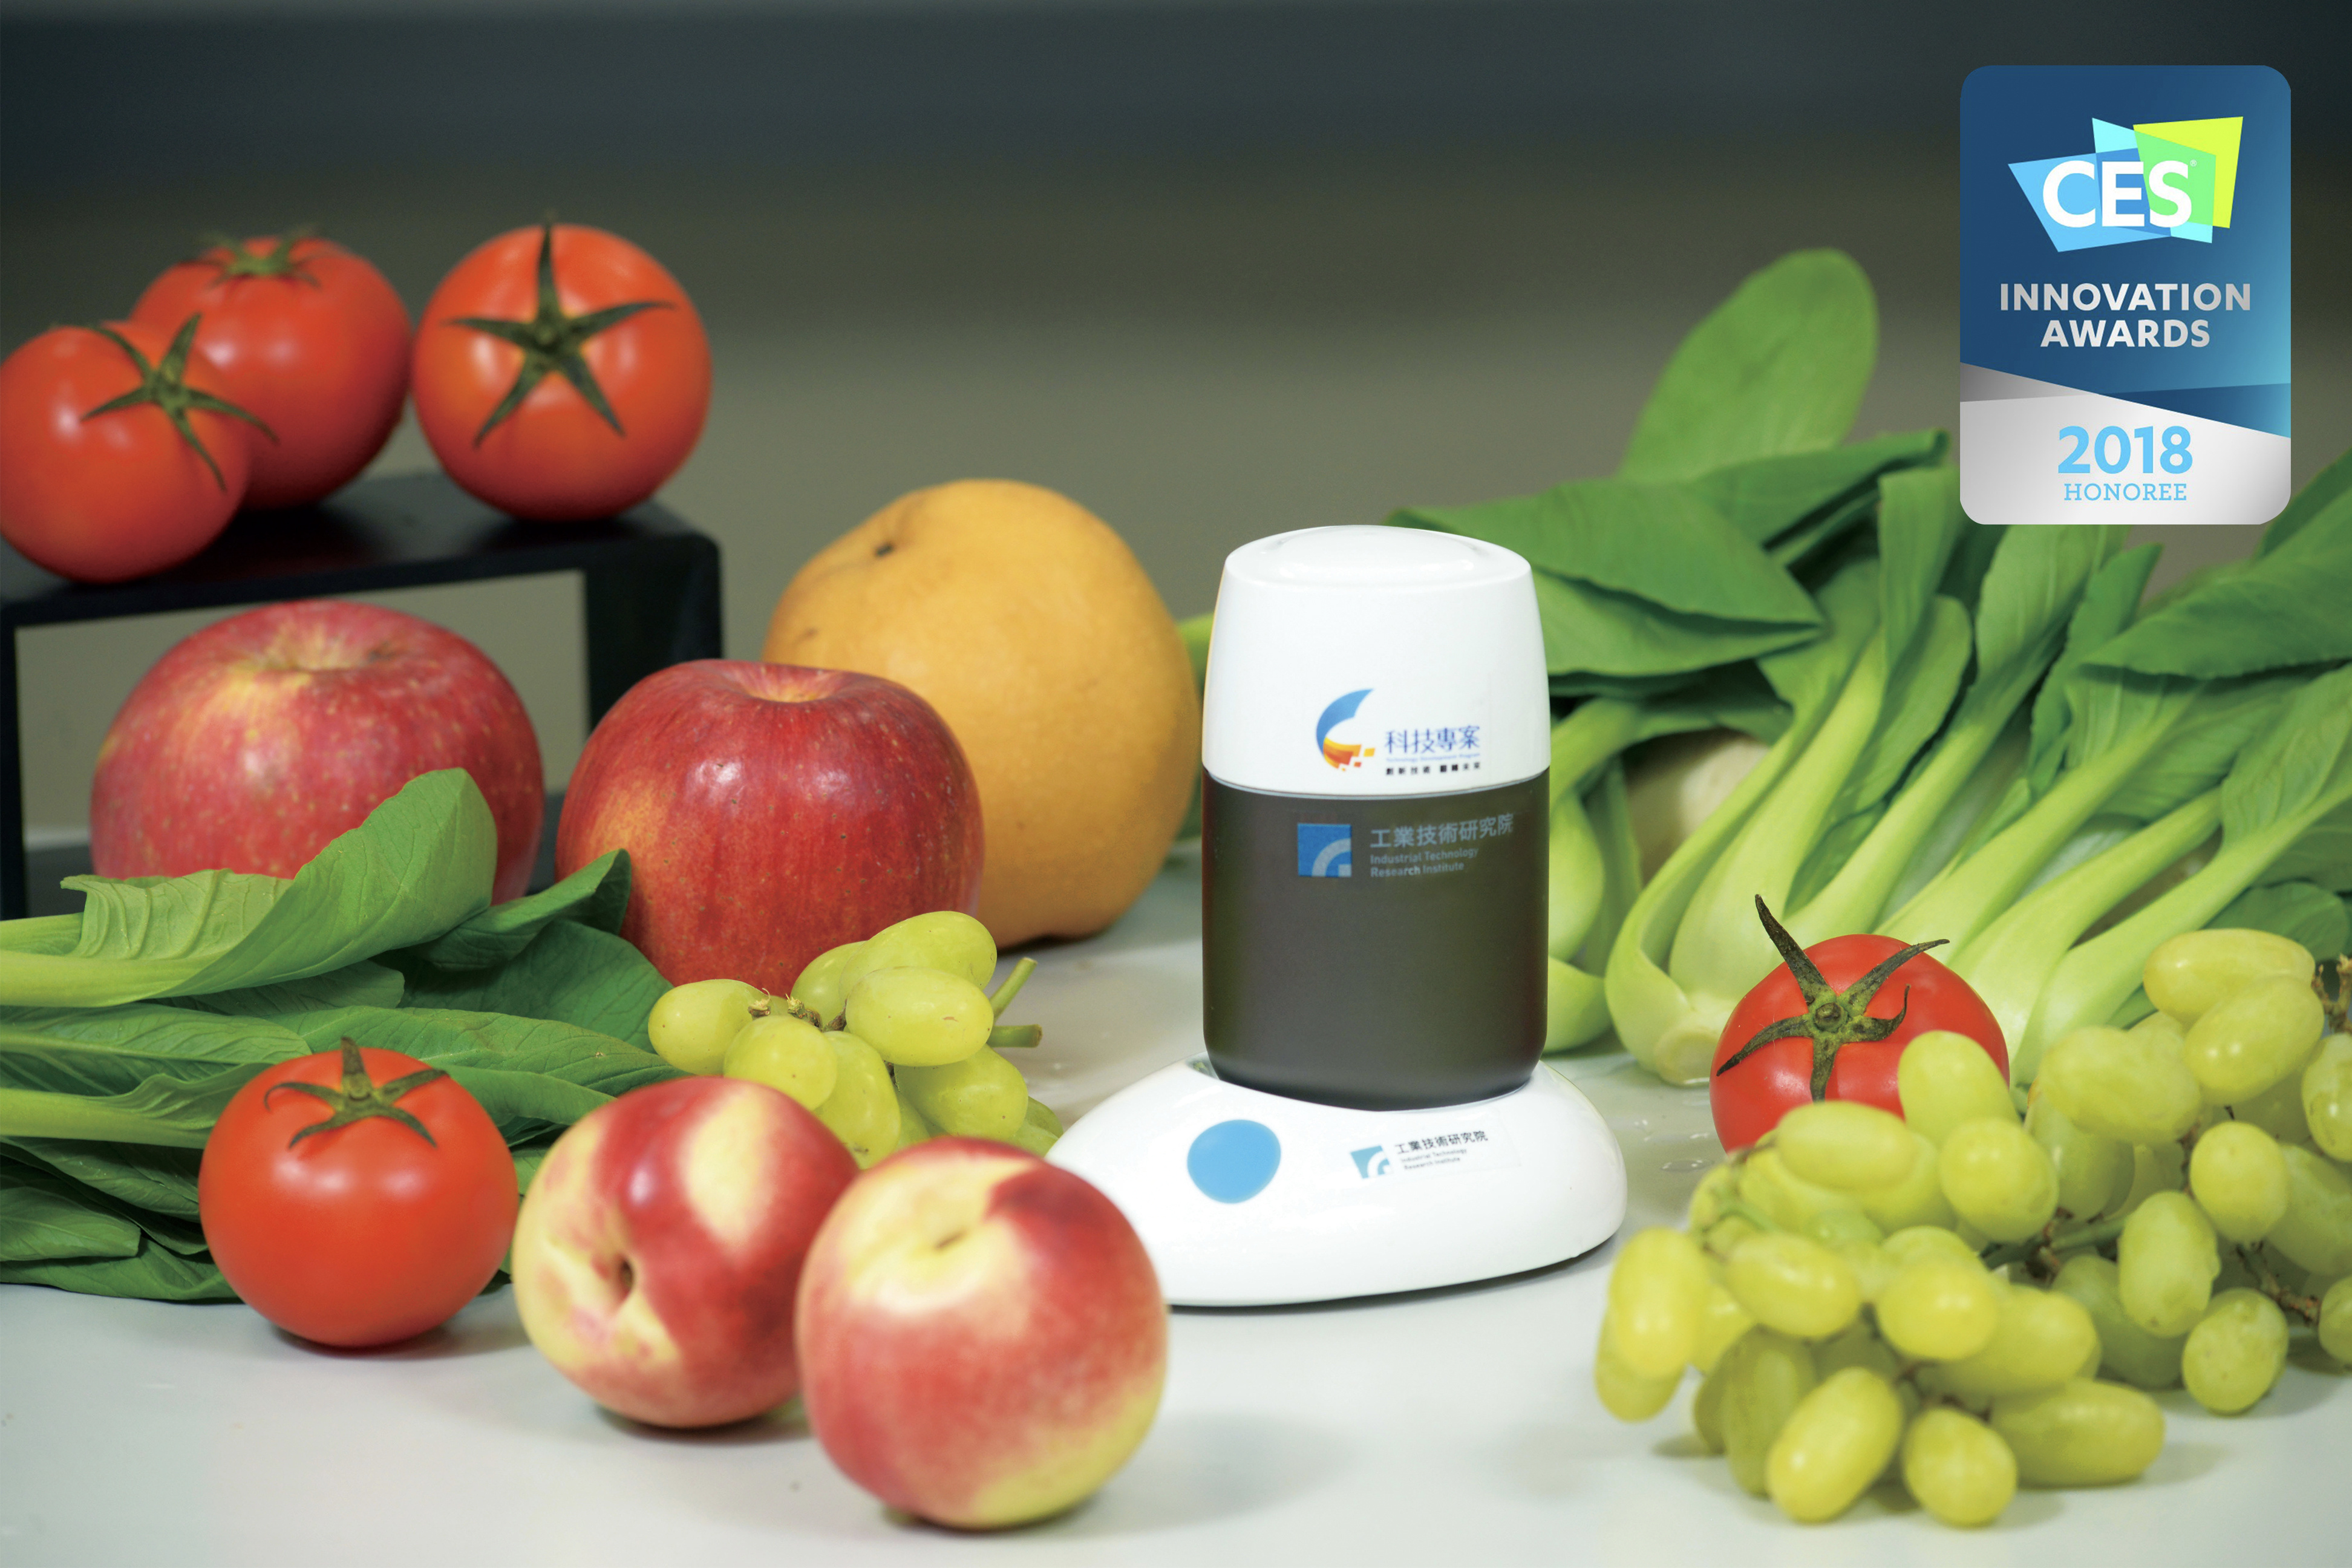 The Handheld Pesticide Residue Detector